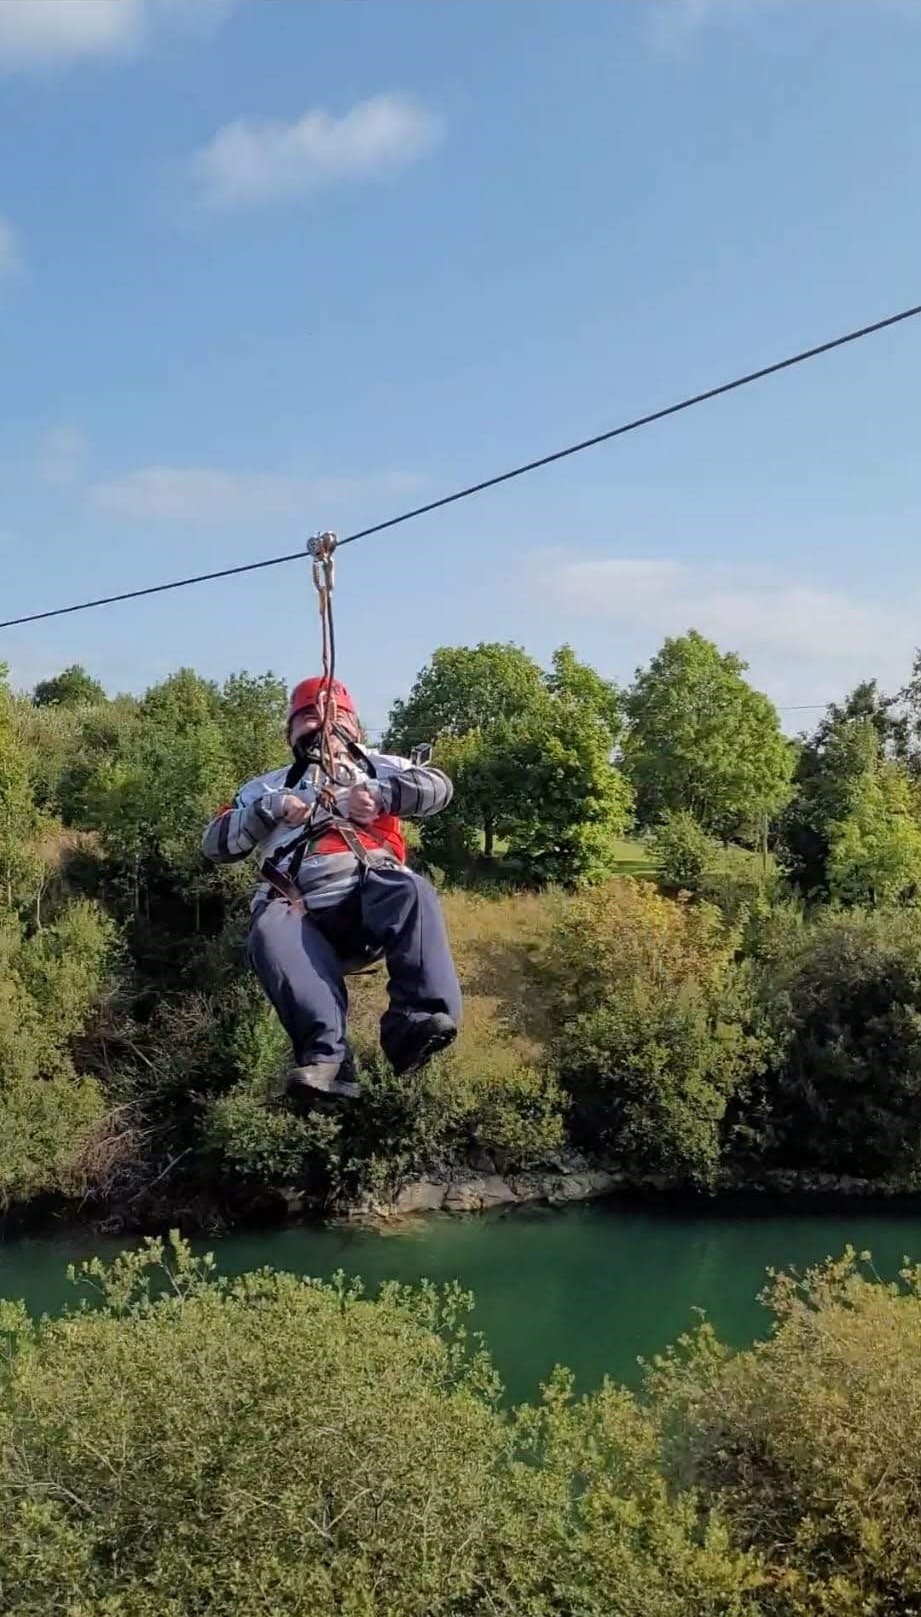 Man Zip Lining With Green Trees in Background 